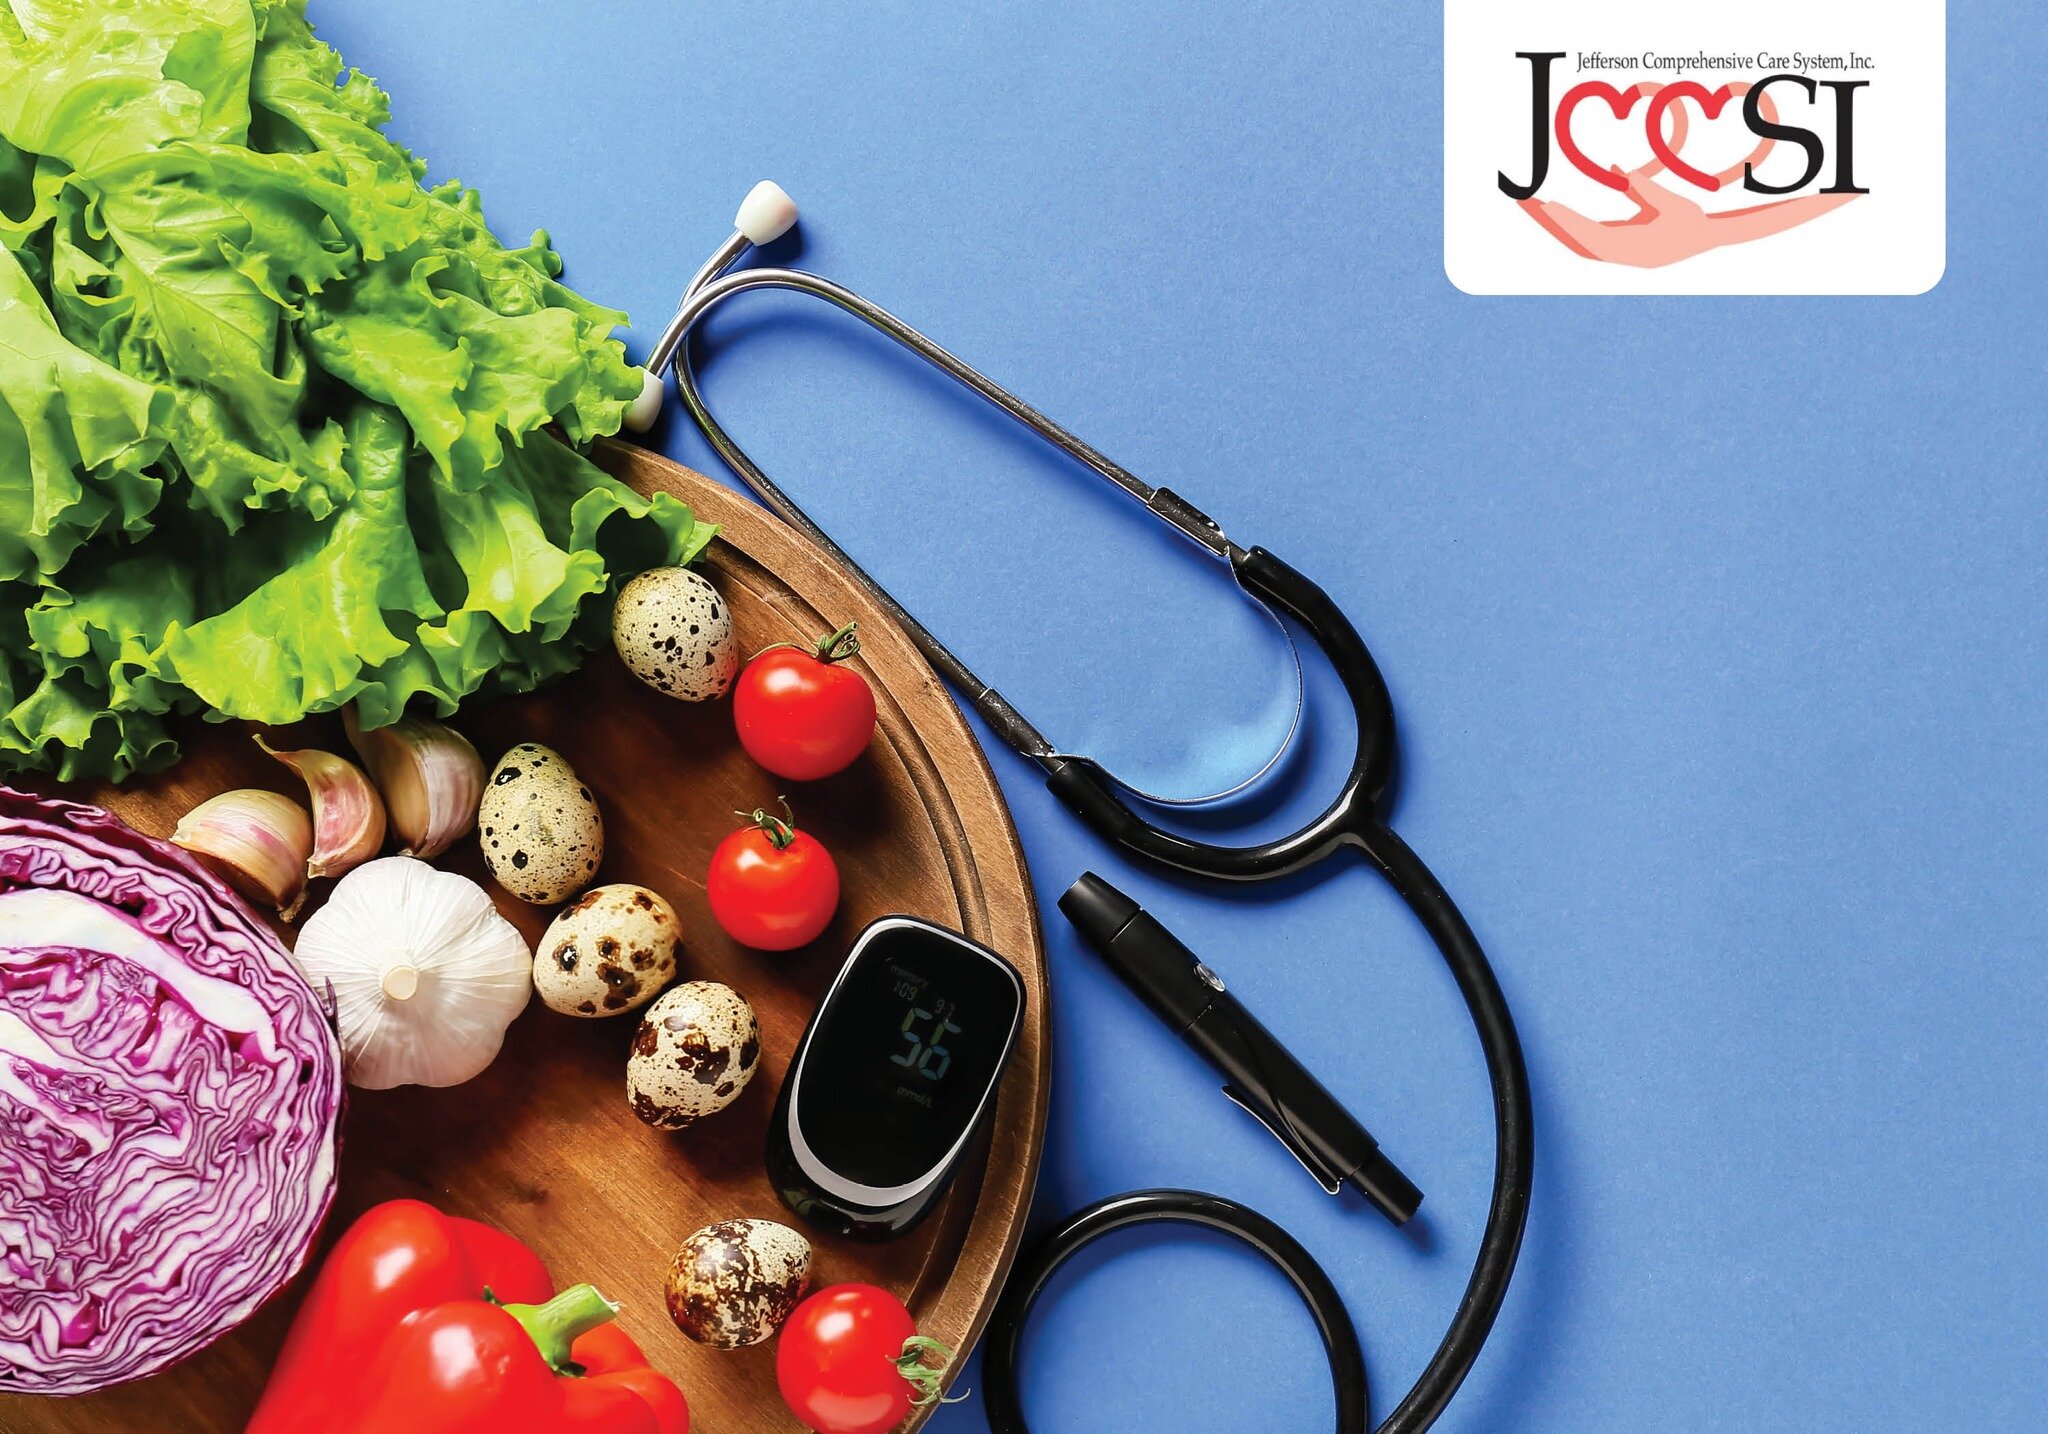 March is National Nutrition Month! At JCCSI, we're celebrating the power of healthy eating for overall well-being. Our comprehensive health services support your journey to a balanced and nutritious life. Let's make informed choices for a healthier y